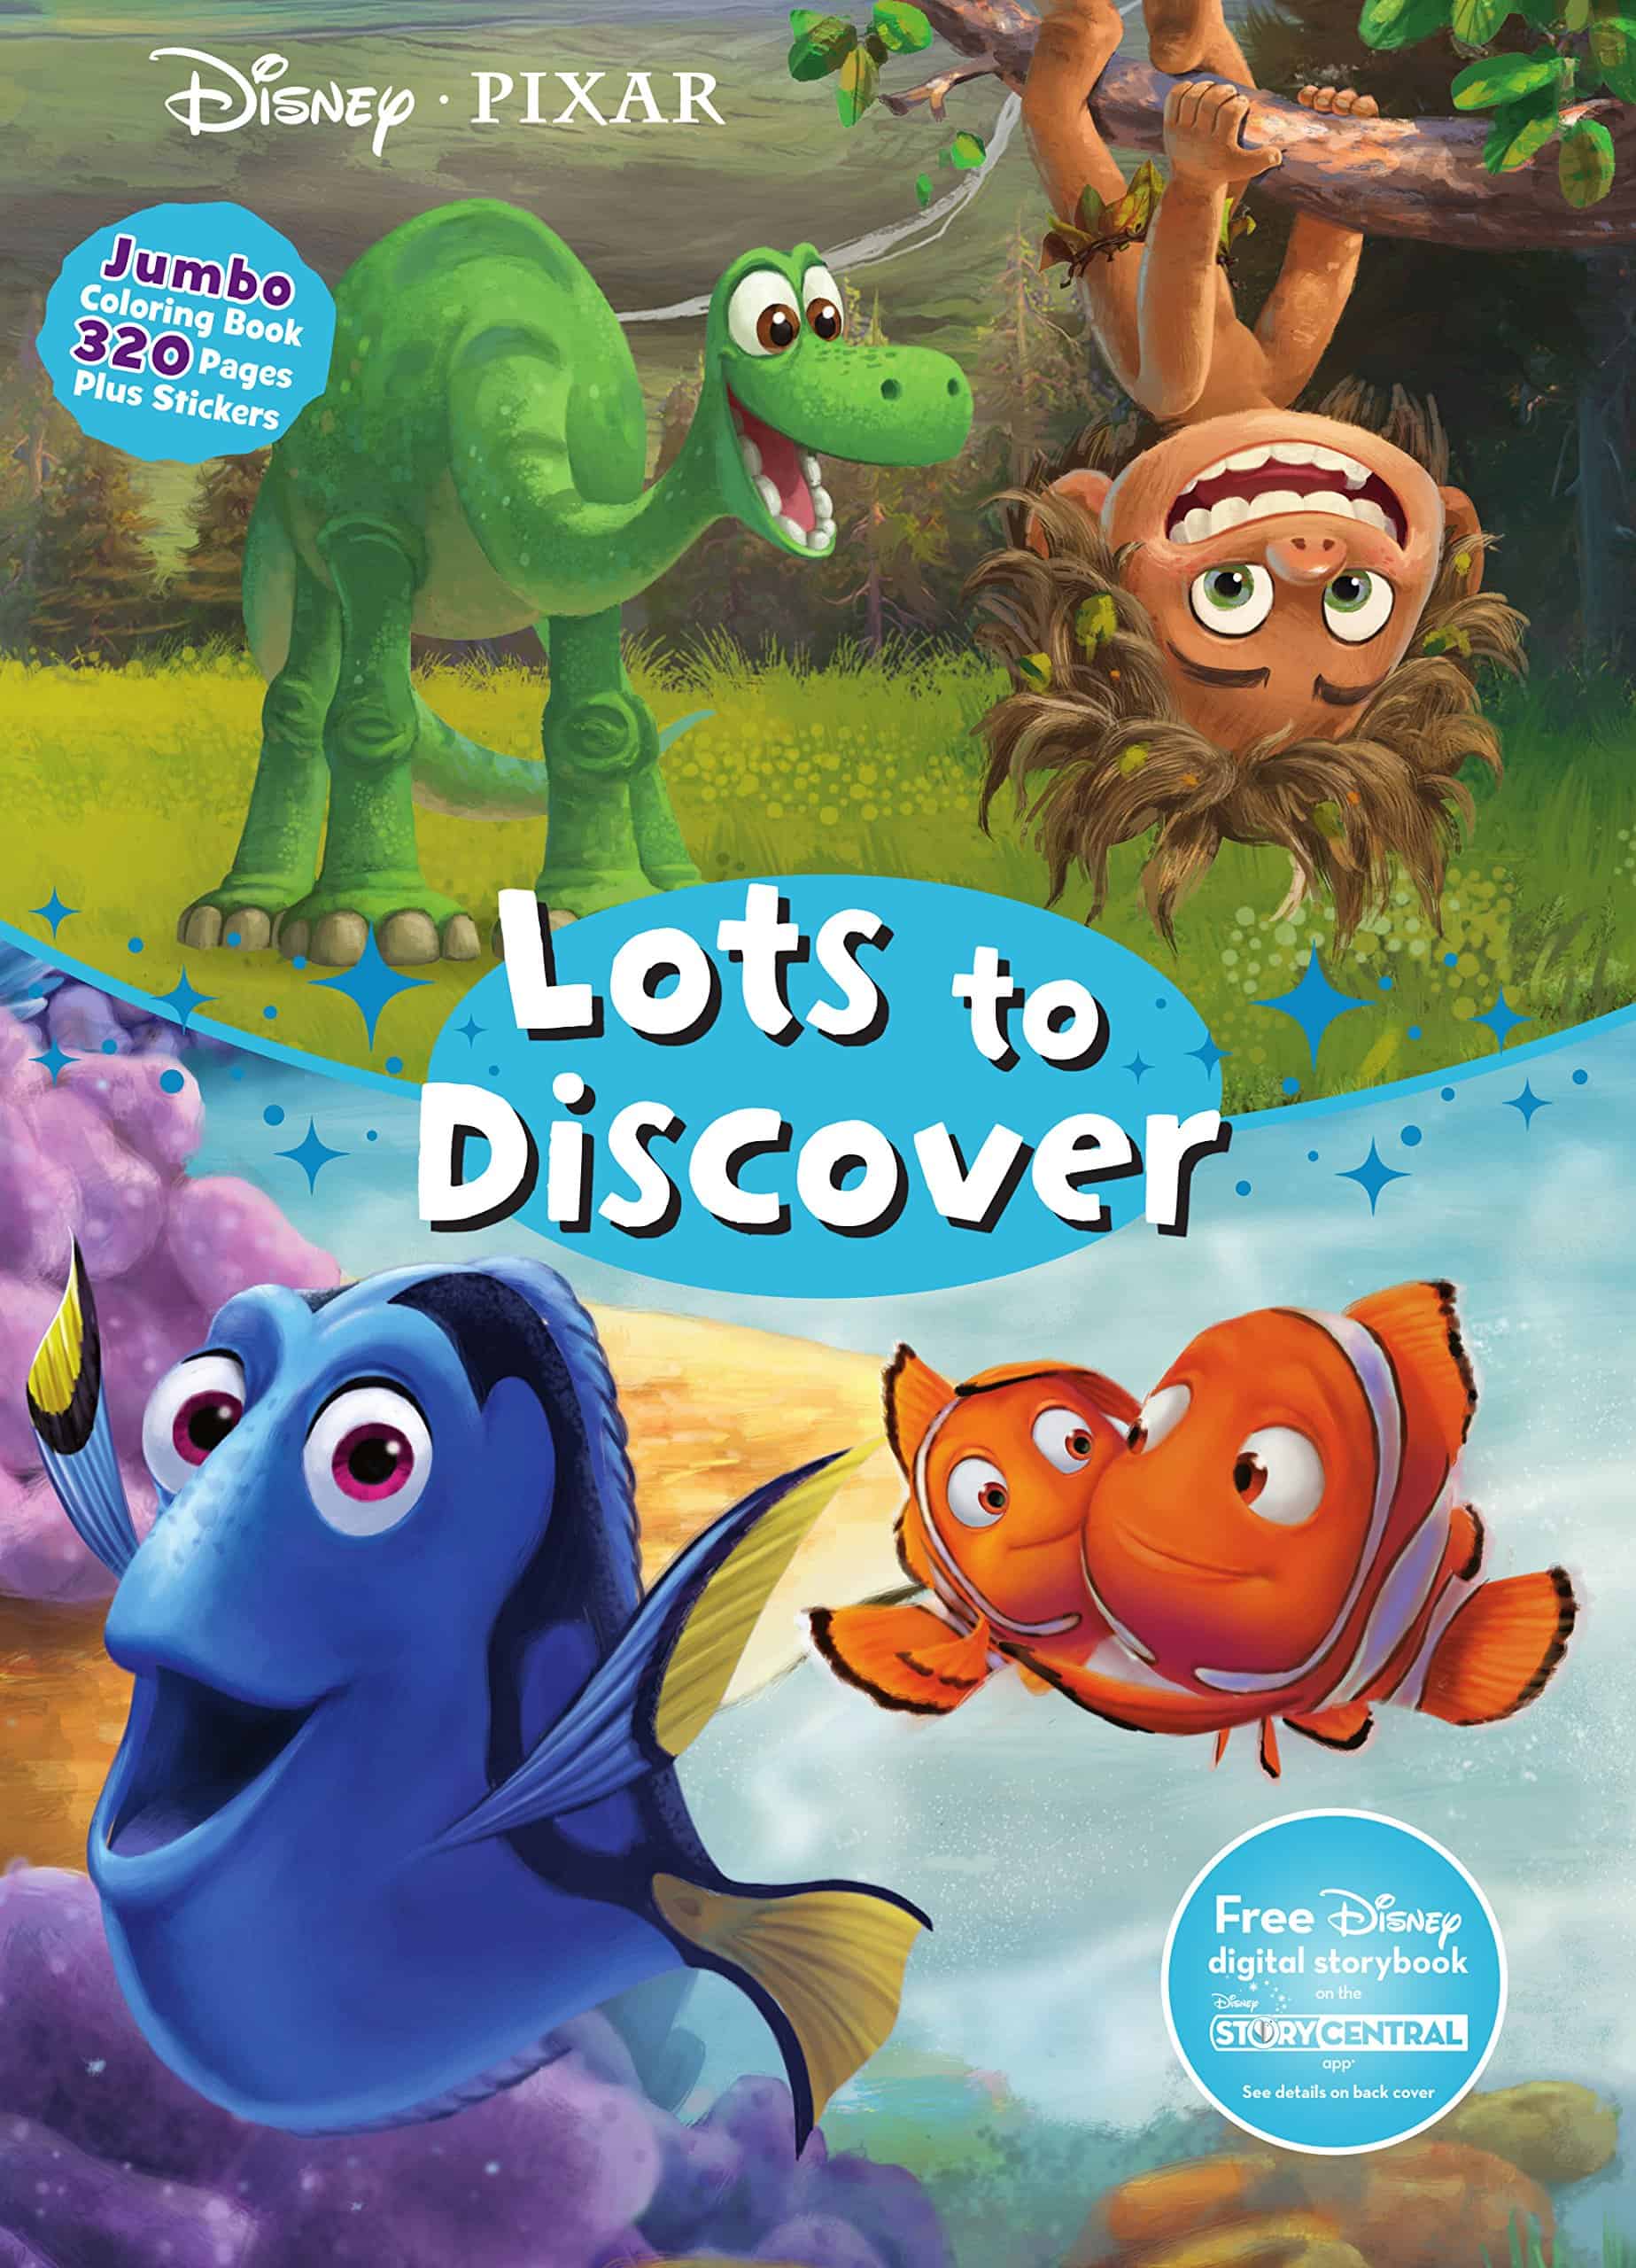 Disney's Lots to Discover Jumbo Coloring Book Plus Stickers